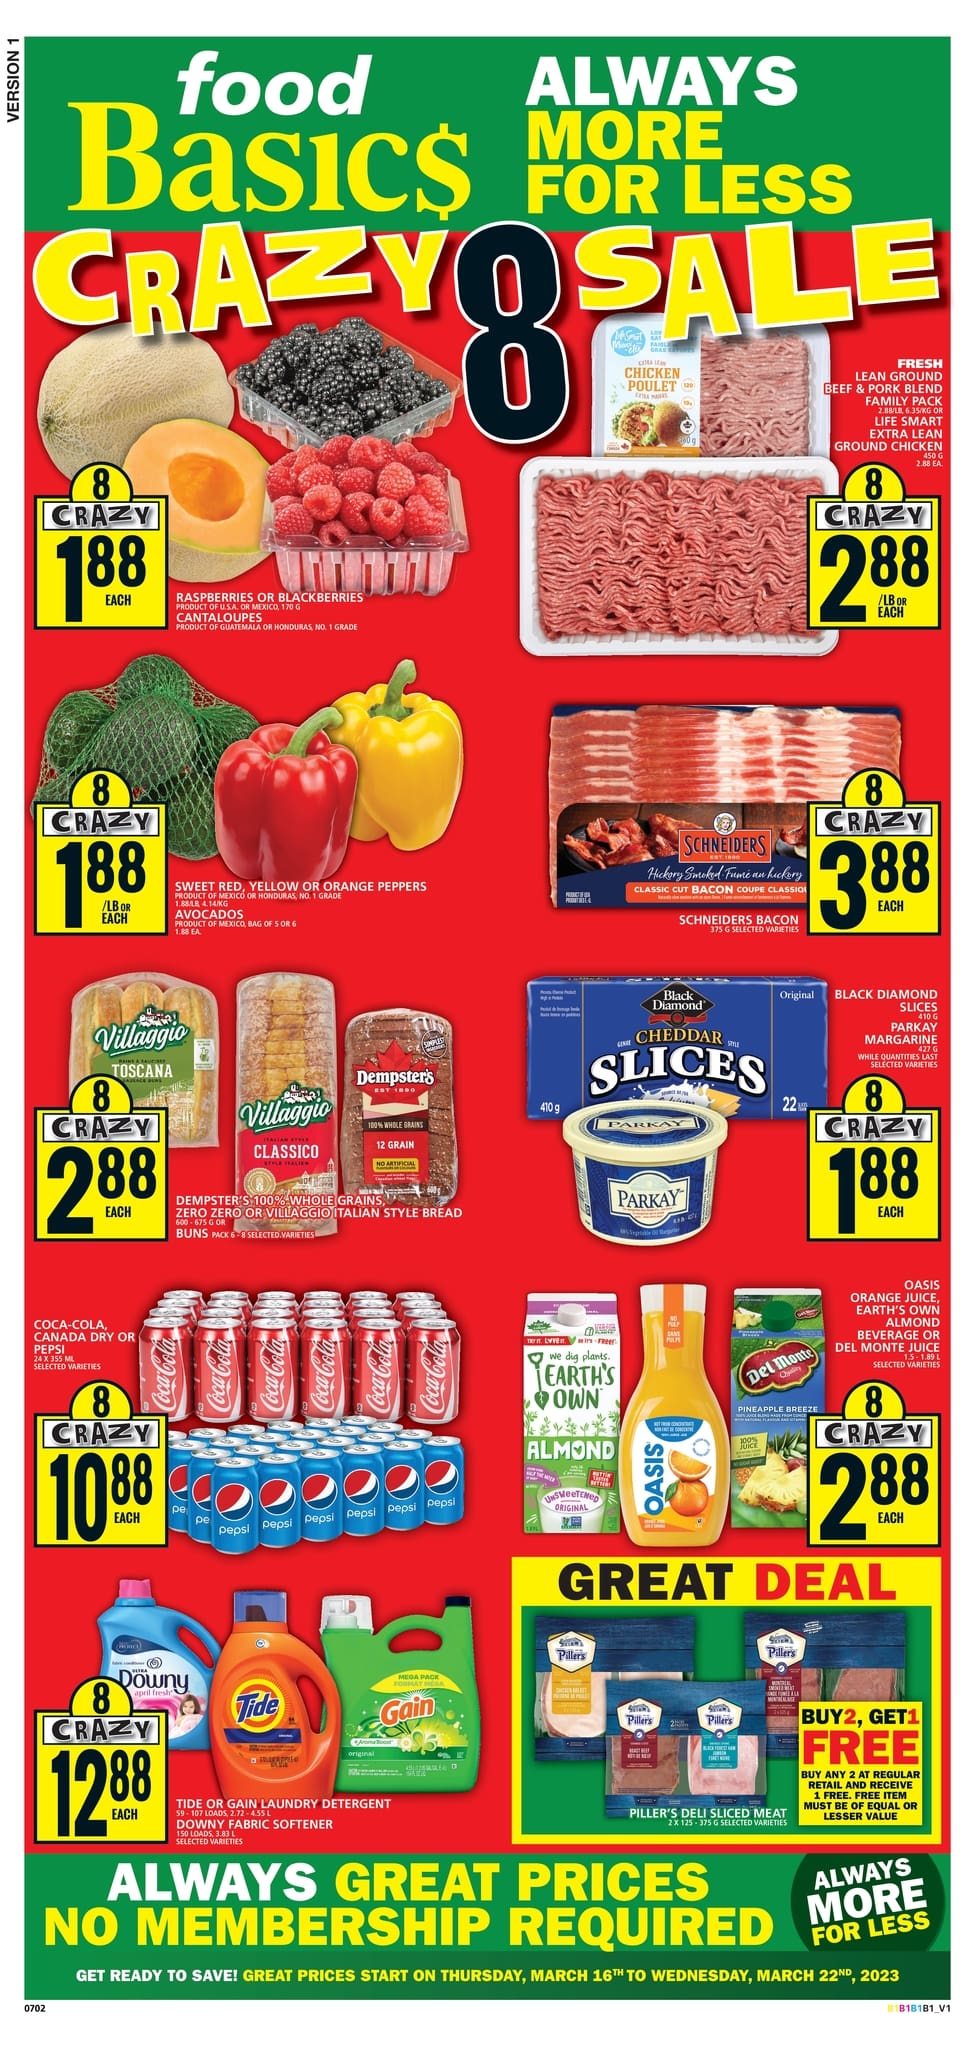 Food Basics - Weekly Flyer Specials - Page 1